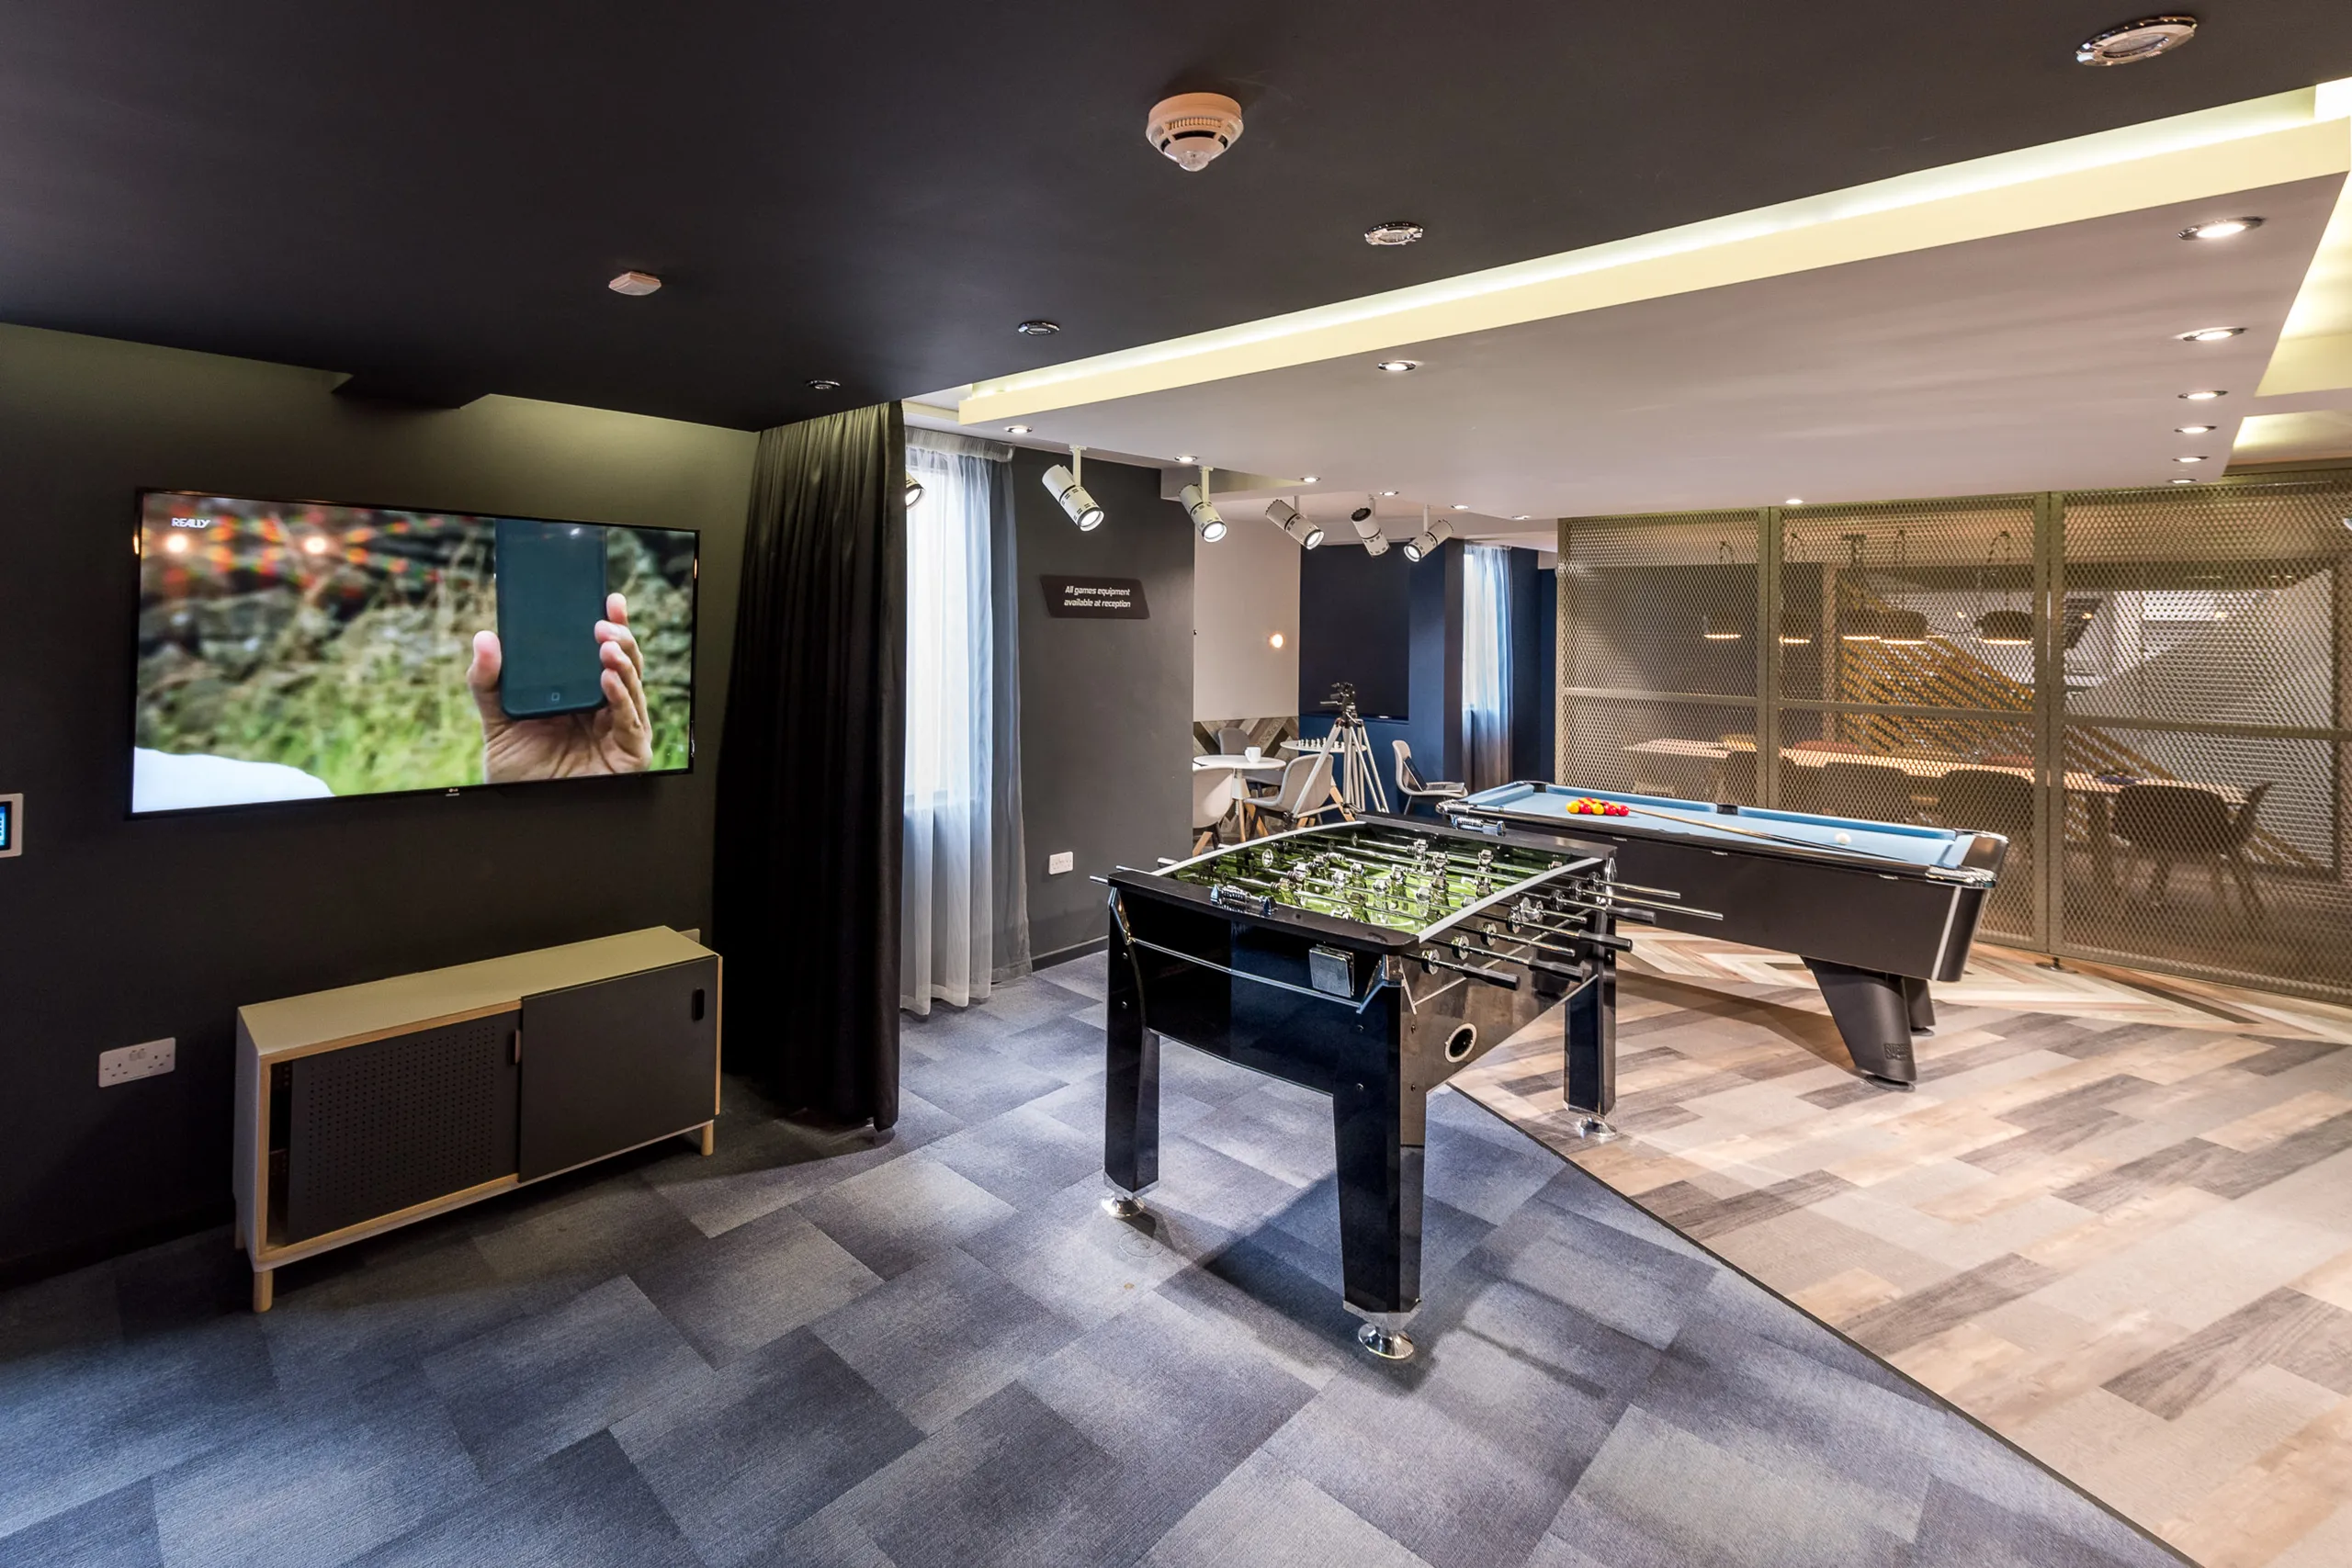 The Kingfisher games room